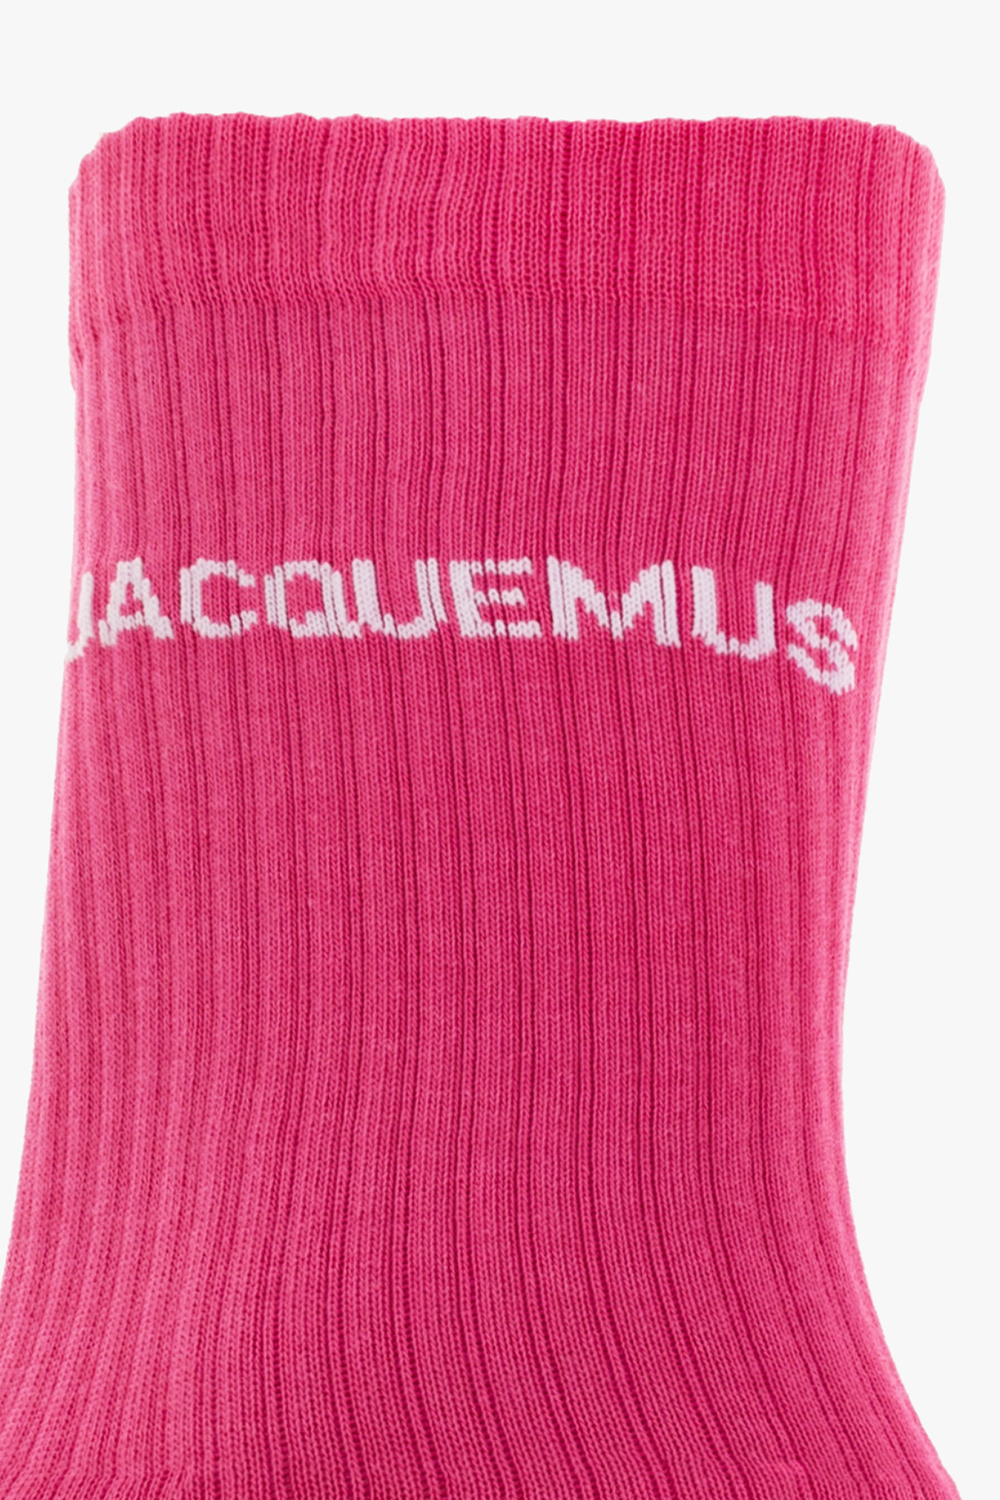 Jacquemus for the perfect Christmas tree gift